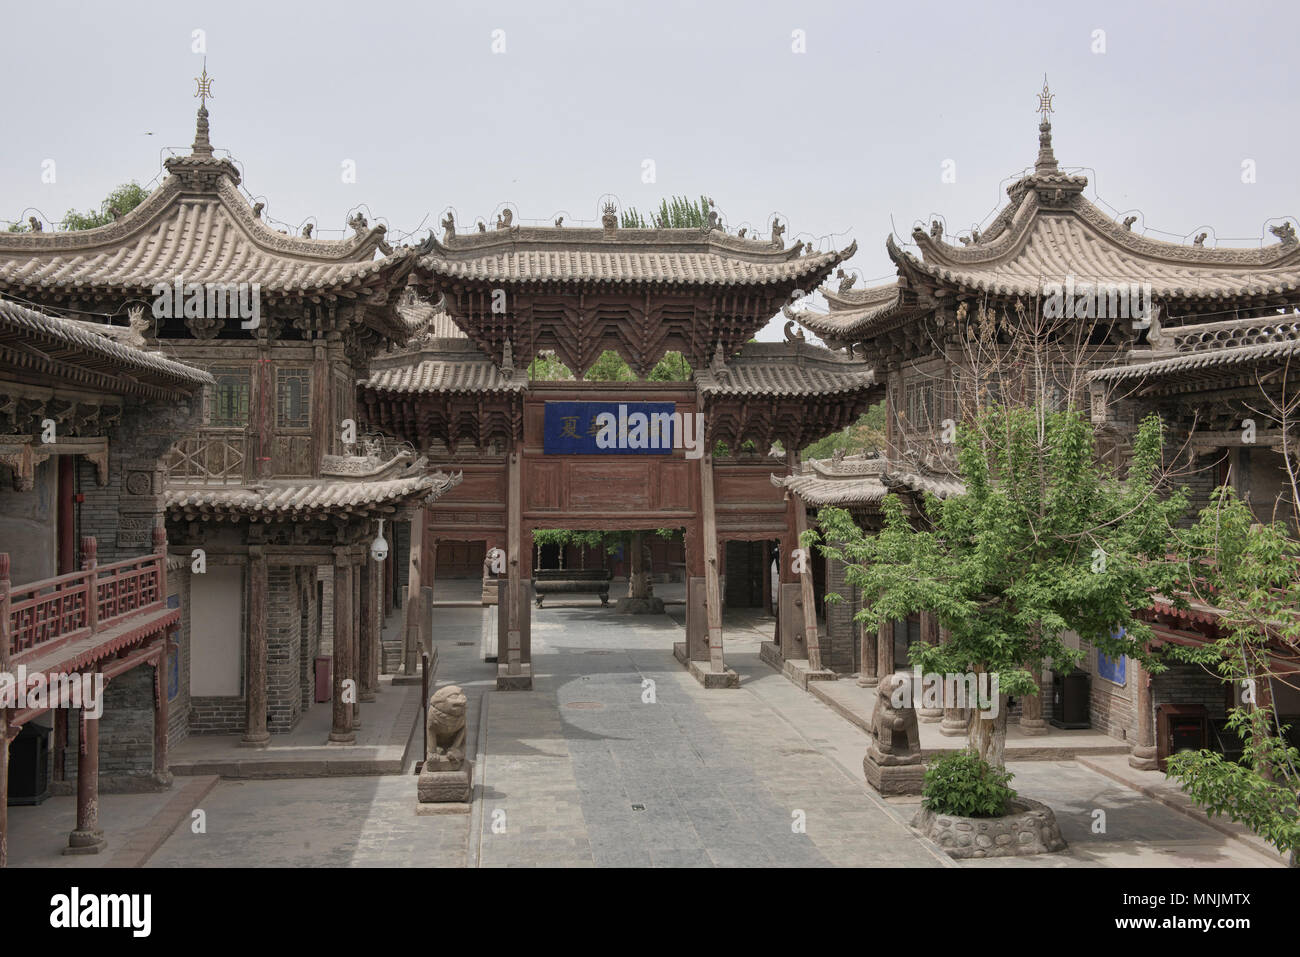 The Shanxi Guild at Dafo Temple, dating from 1100, Zhangye, Gansu, China Stock Photo